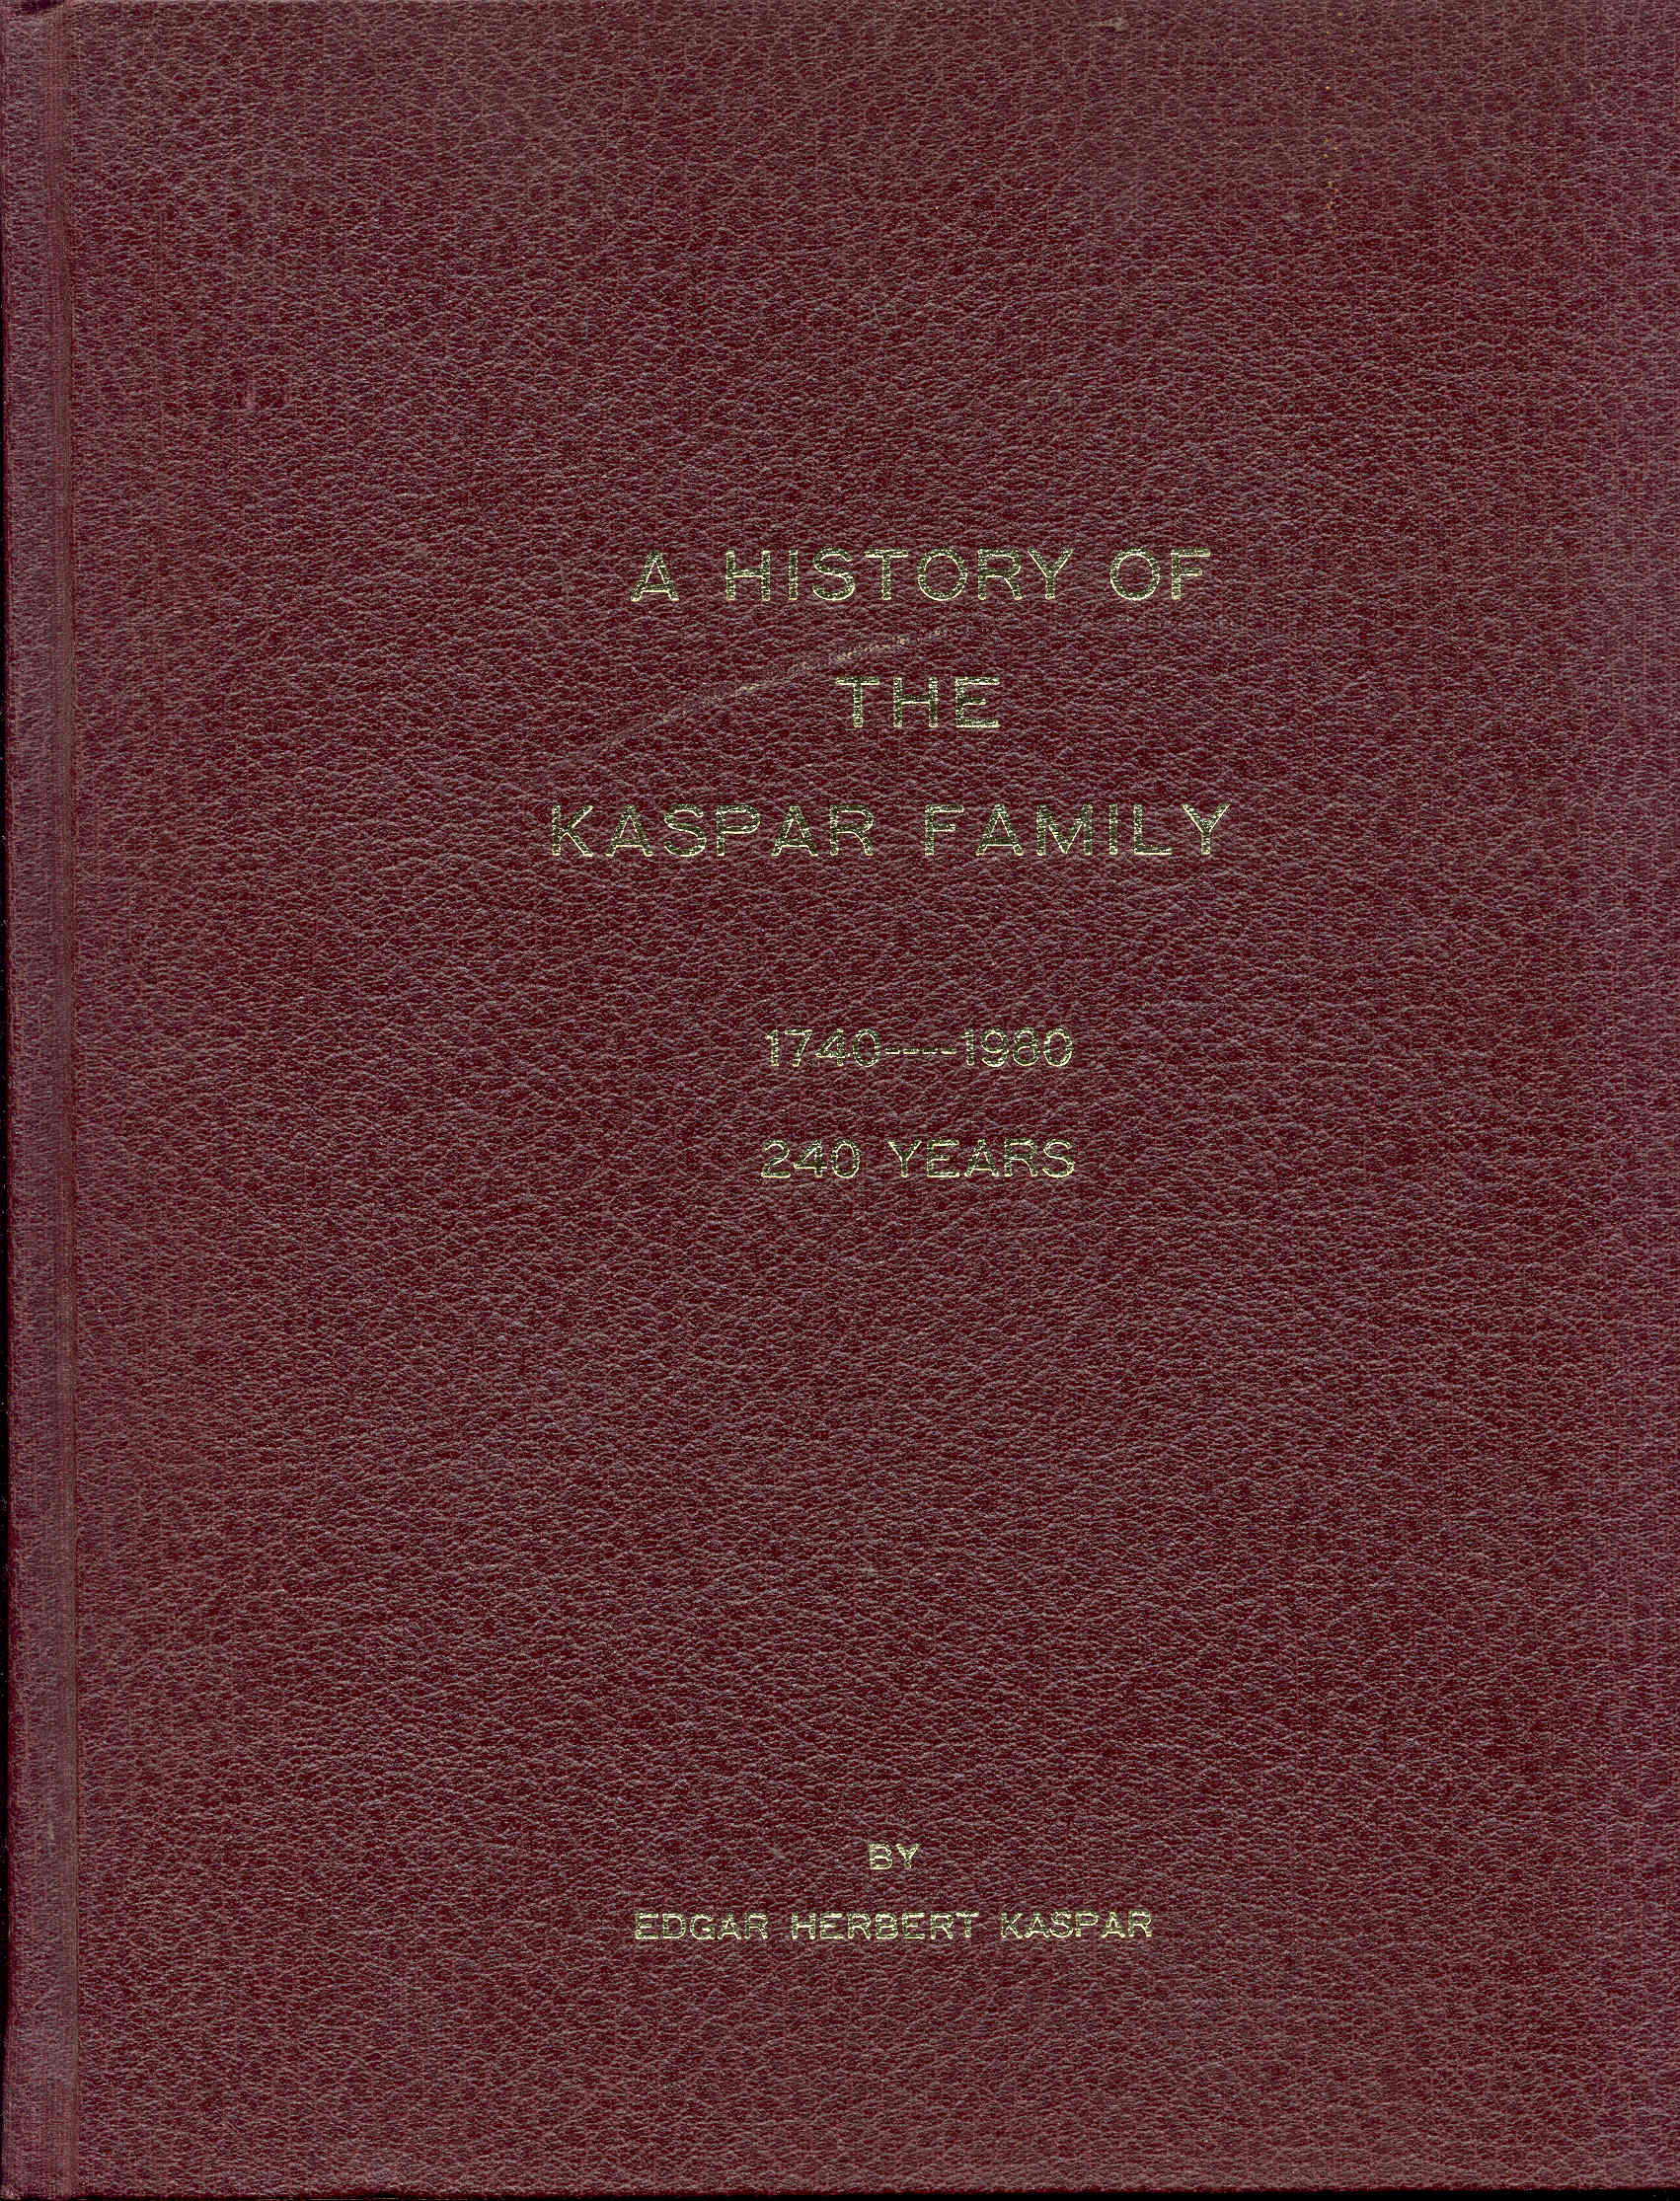 Image for A History of the Kaspar Family: 1740-1980 (240 Years)